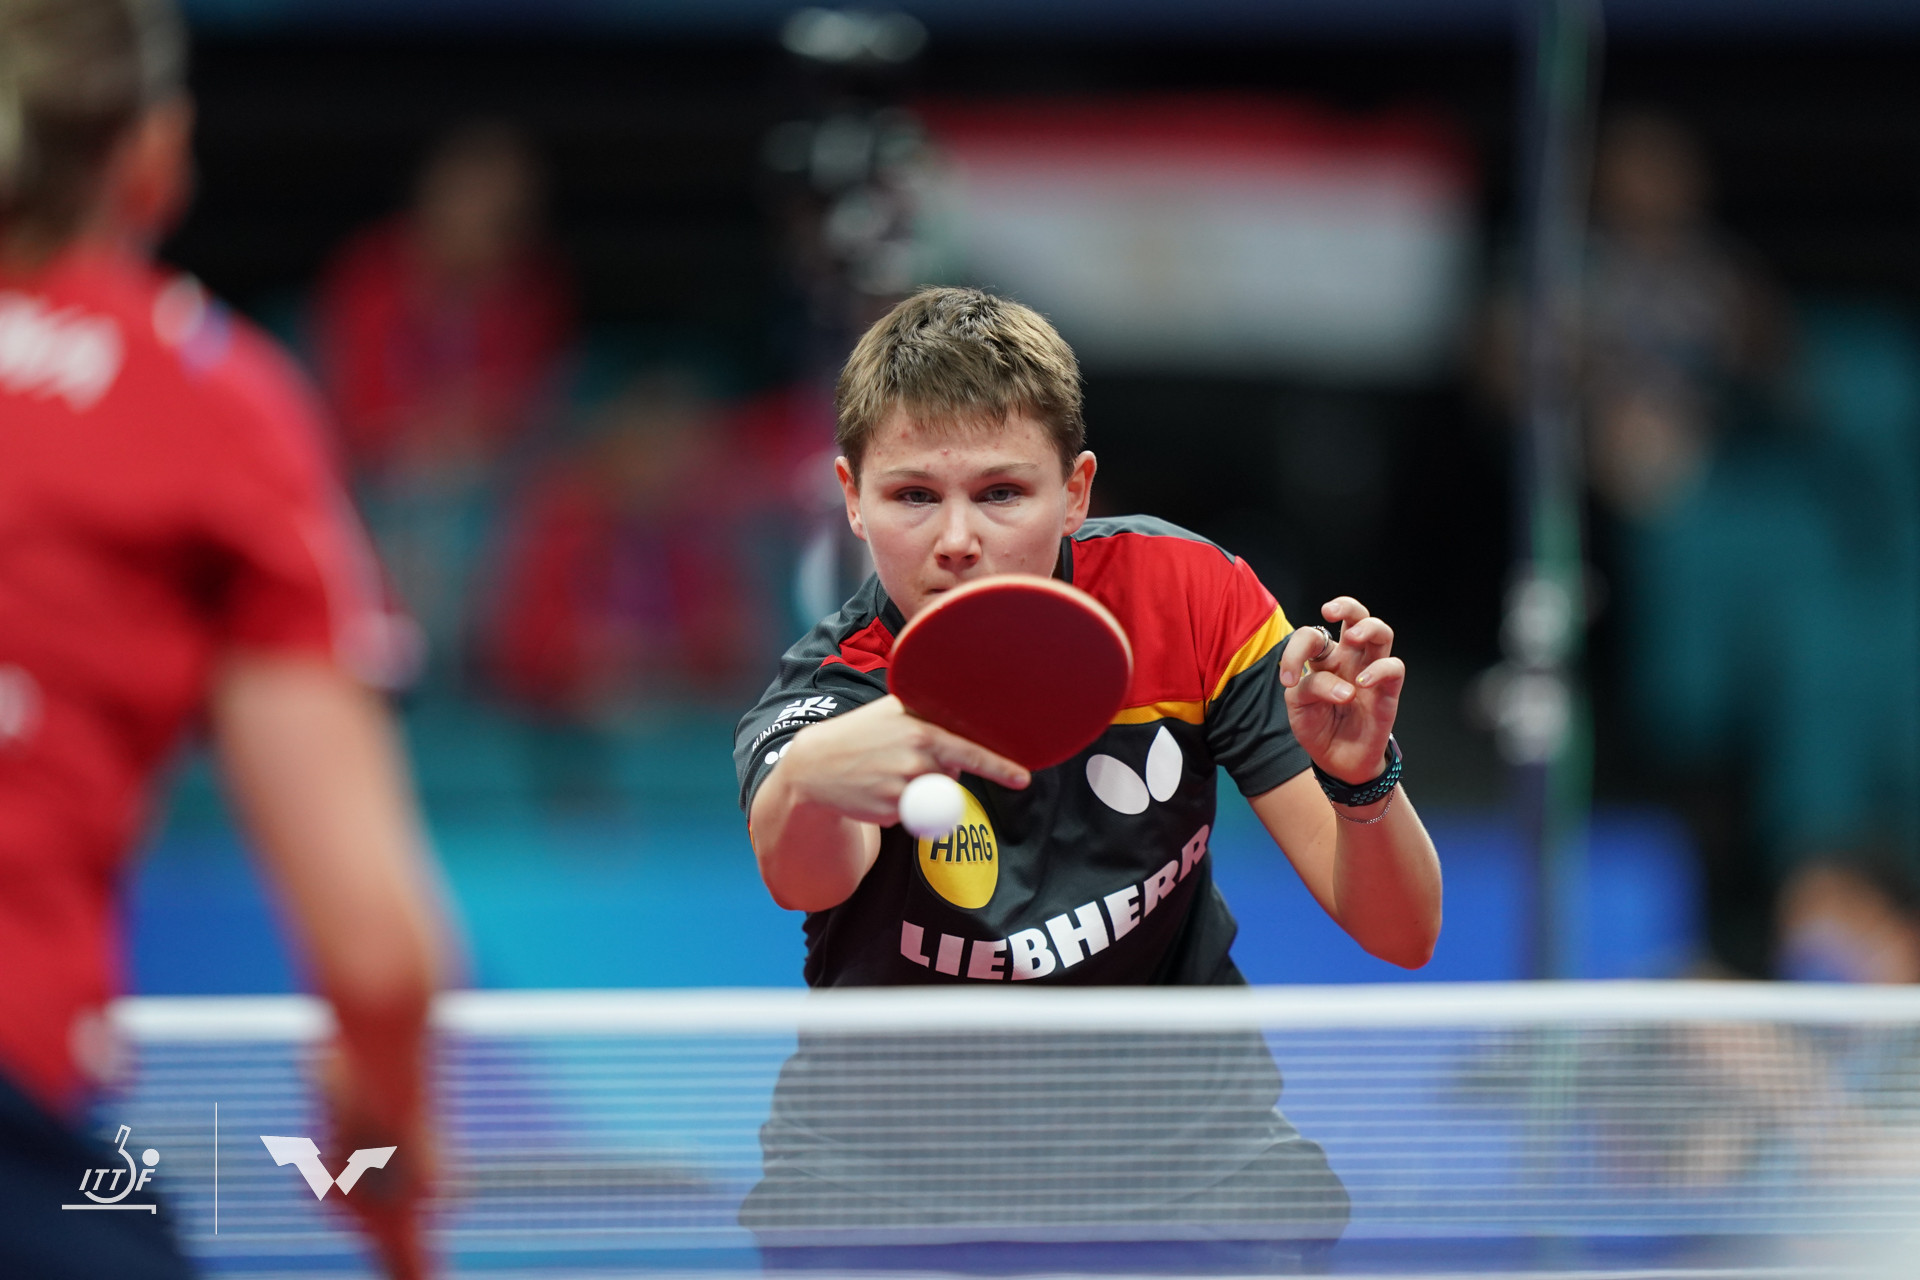 Germany were one of the teams to official advance to the next round ©World Table Tennis/Li Zhiyan